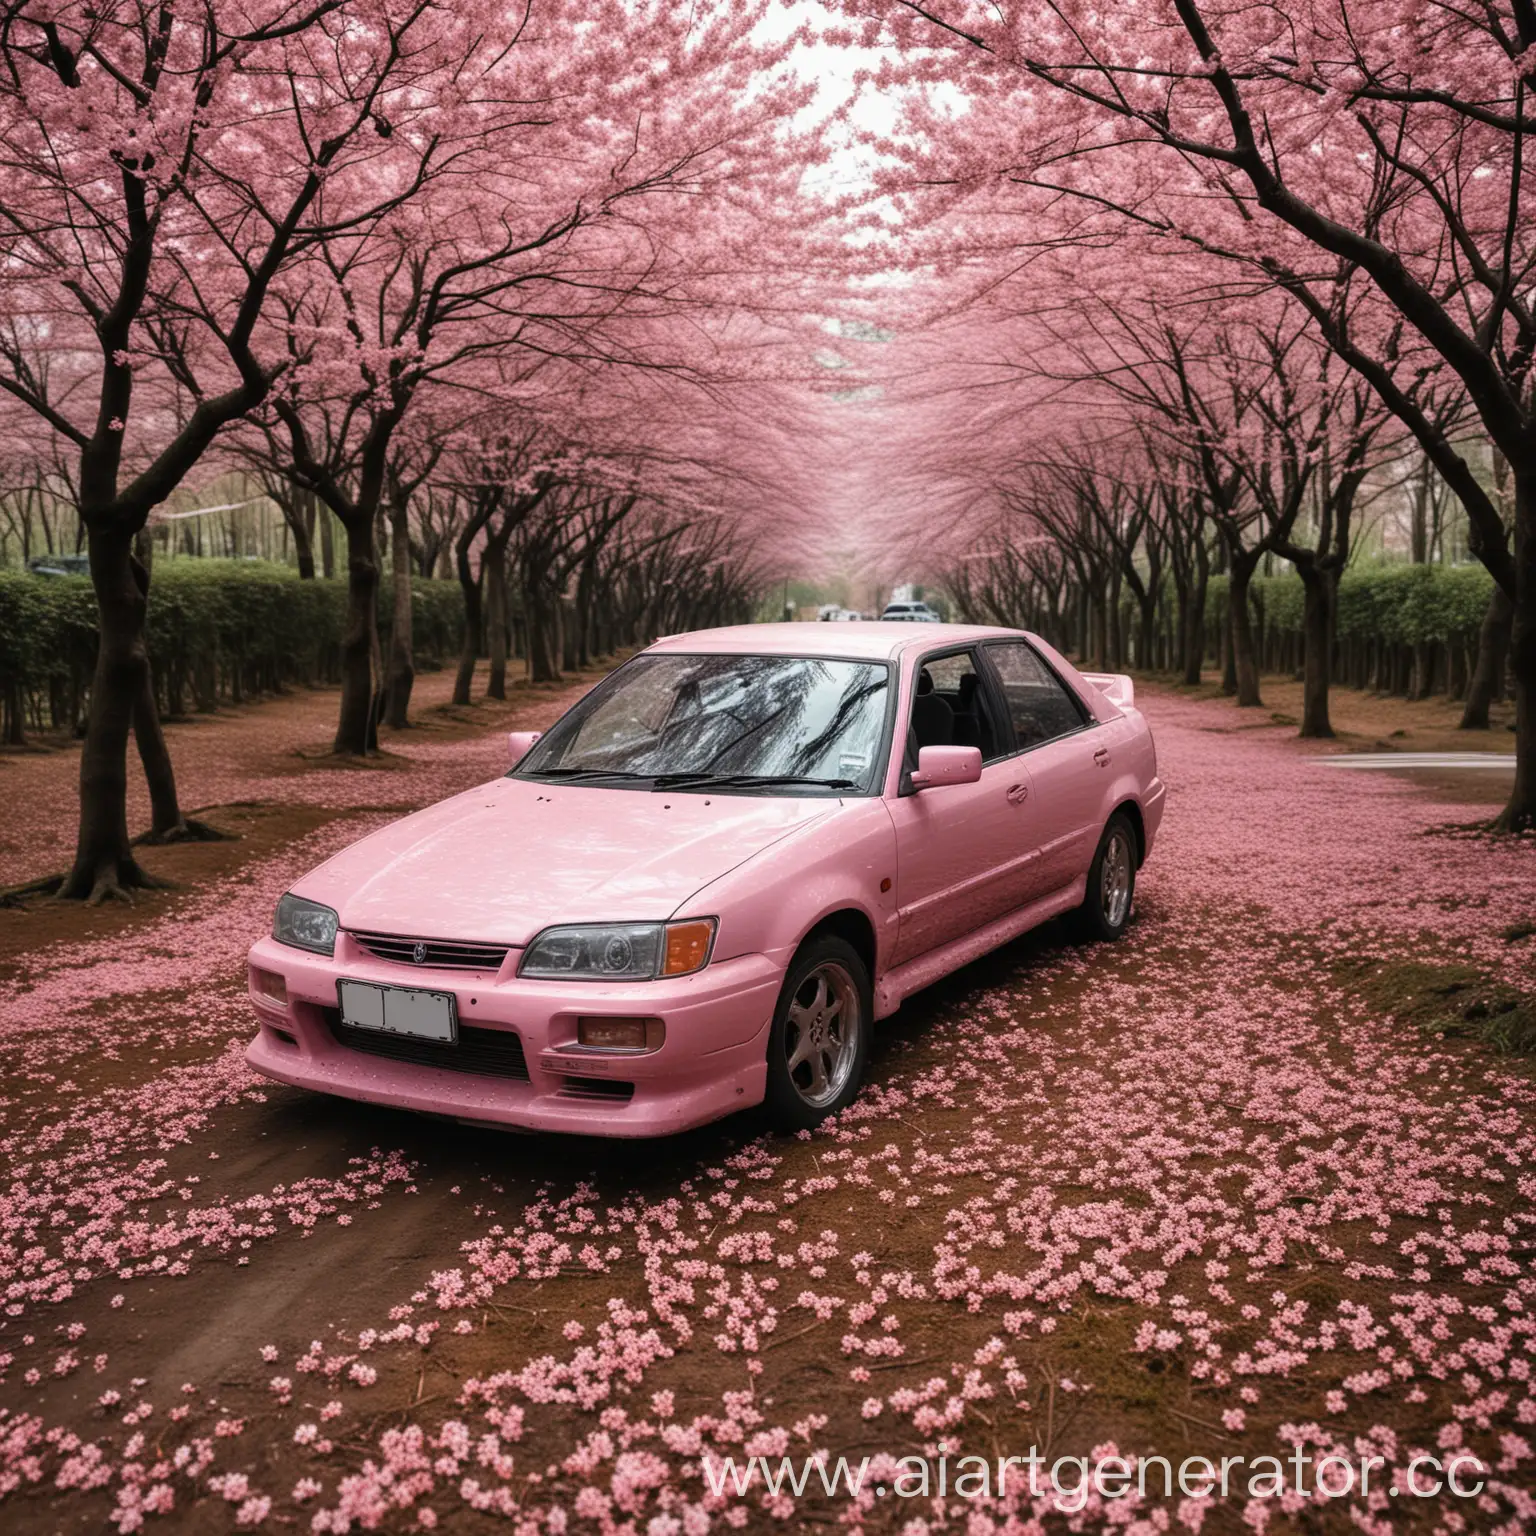 Car-Amidst-Blossoming-Sakura-Trees-in-Tranquil-Forest